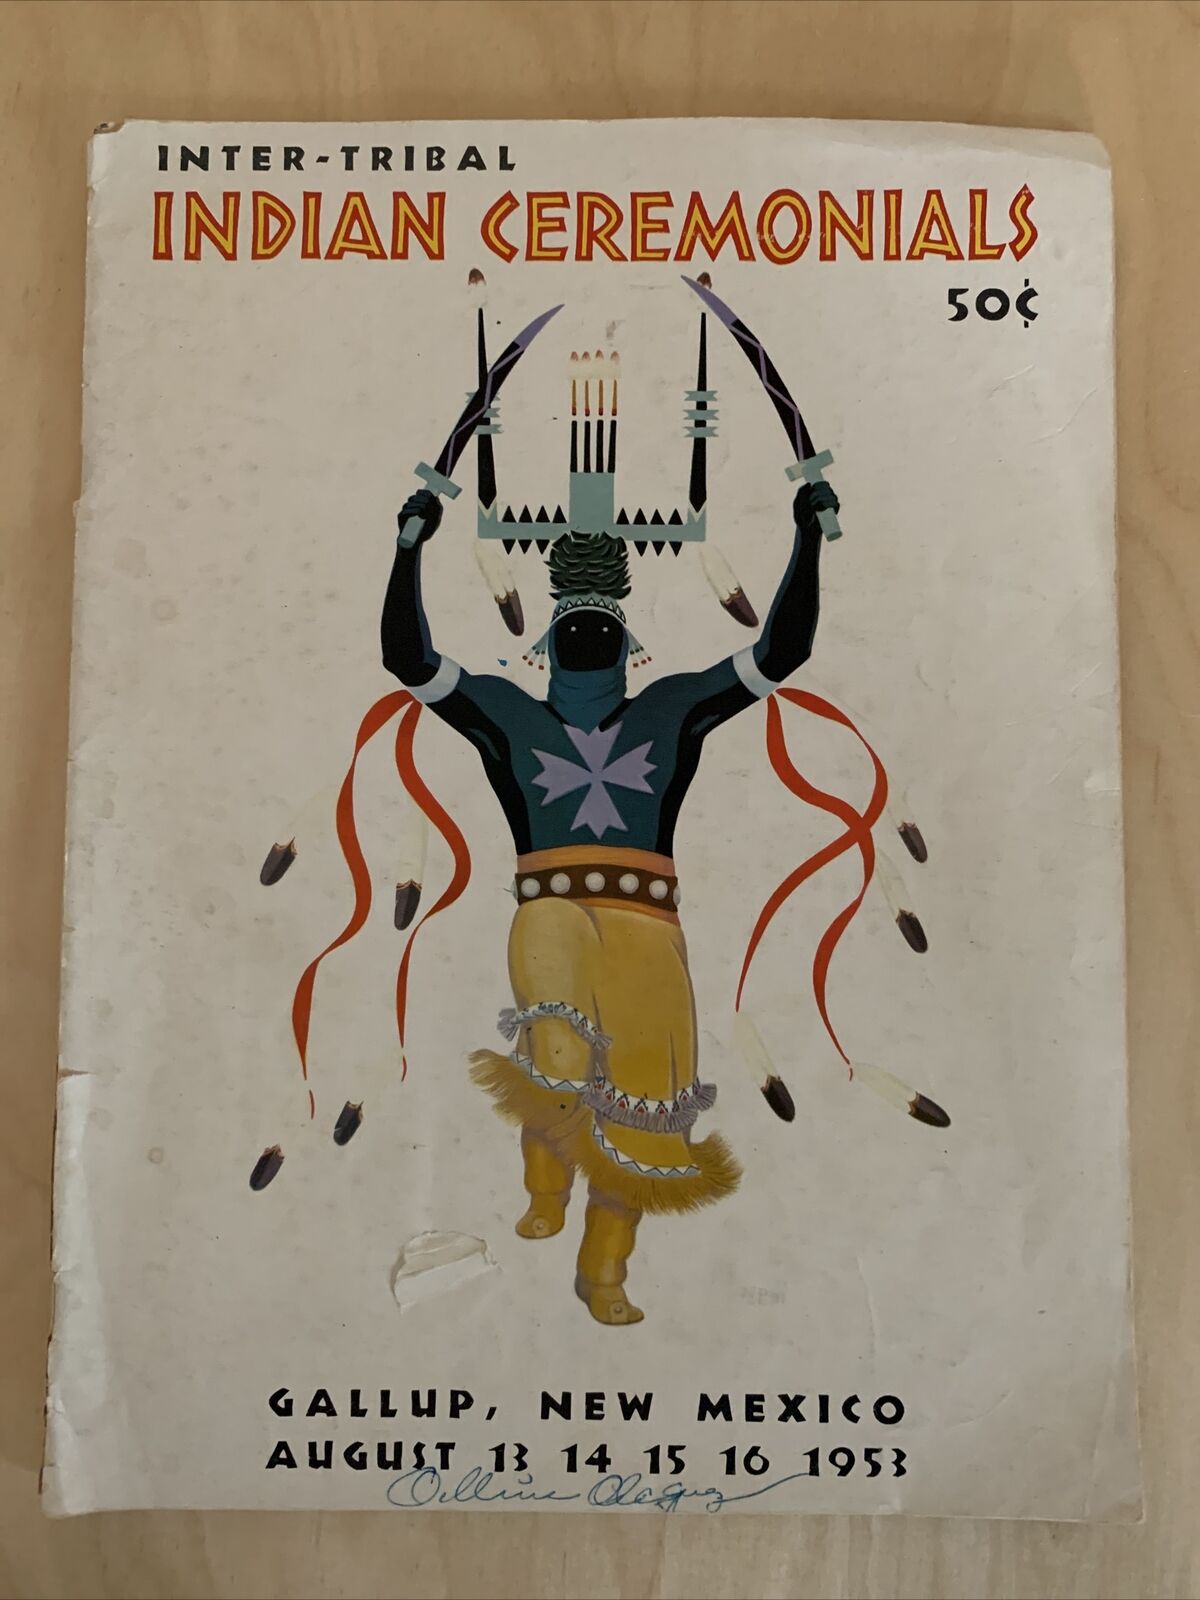 1953 INTER-TRIBAL INDIAN CEREMONIALS MAGAZINE - NICE - Beautiful Color Images